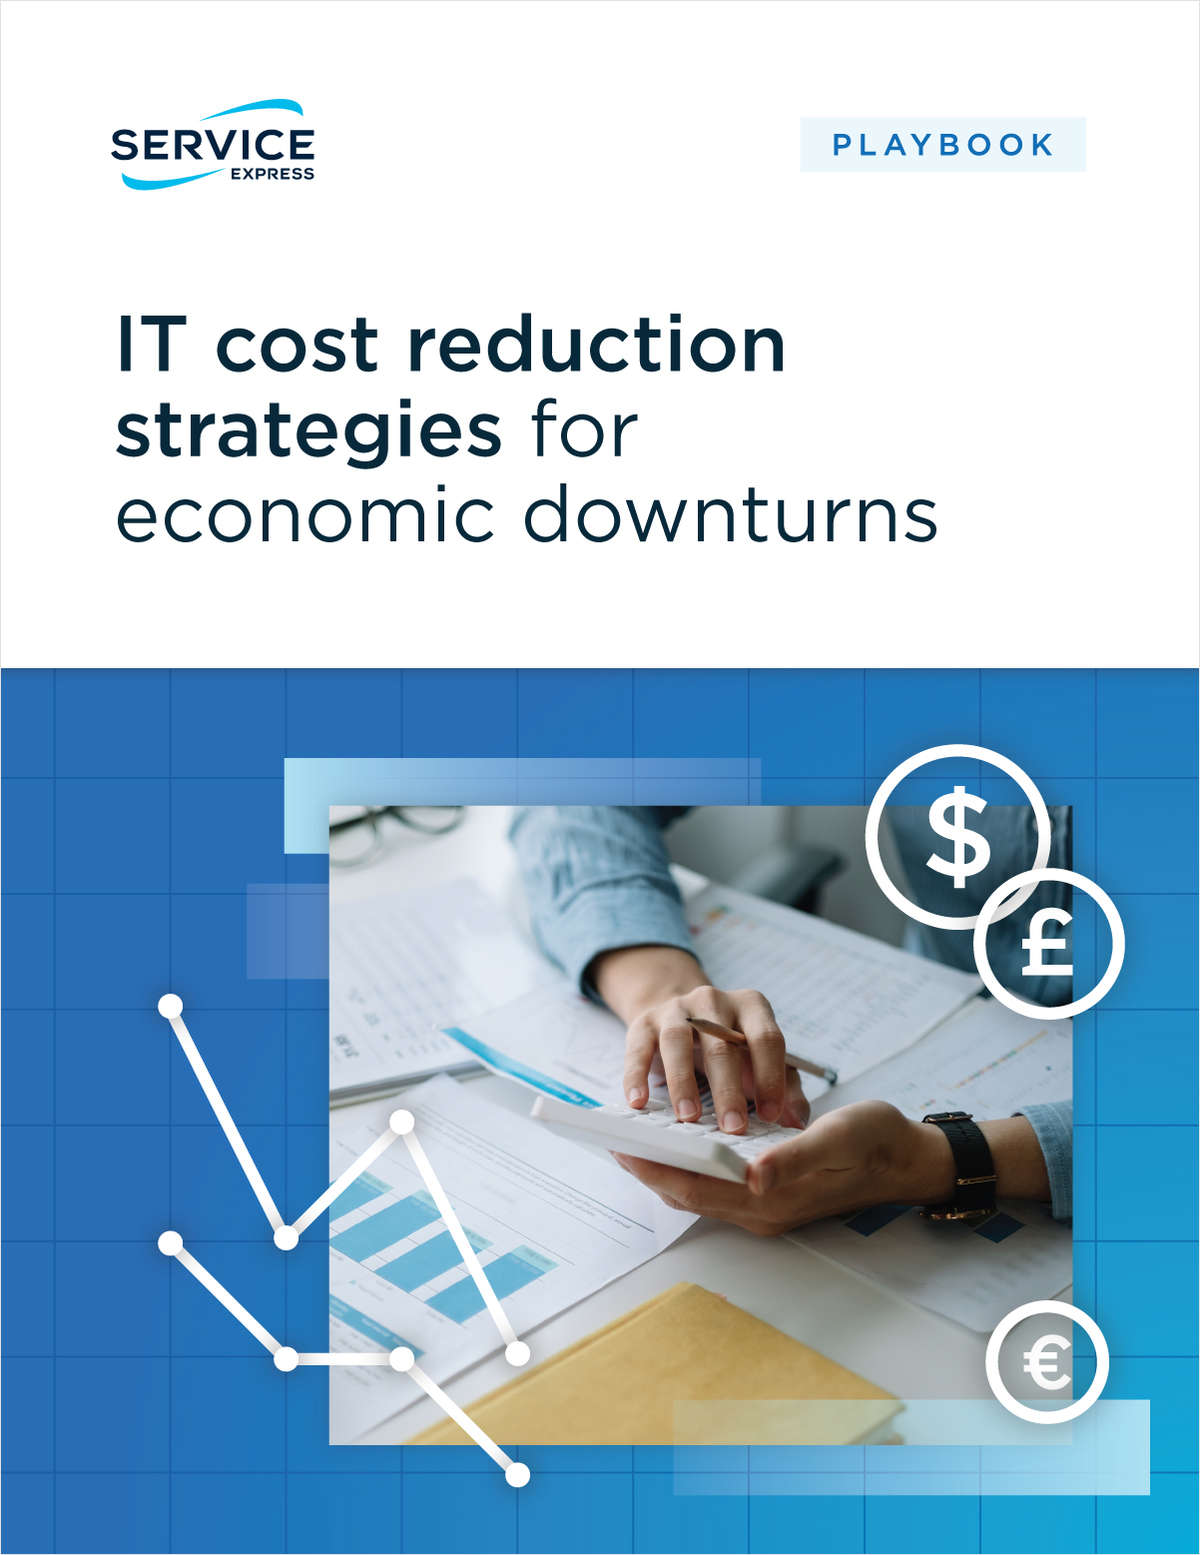 Playbook: IT cost reduction strategies for economic downturns